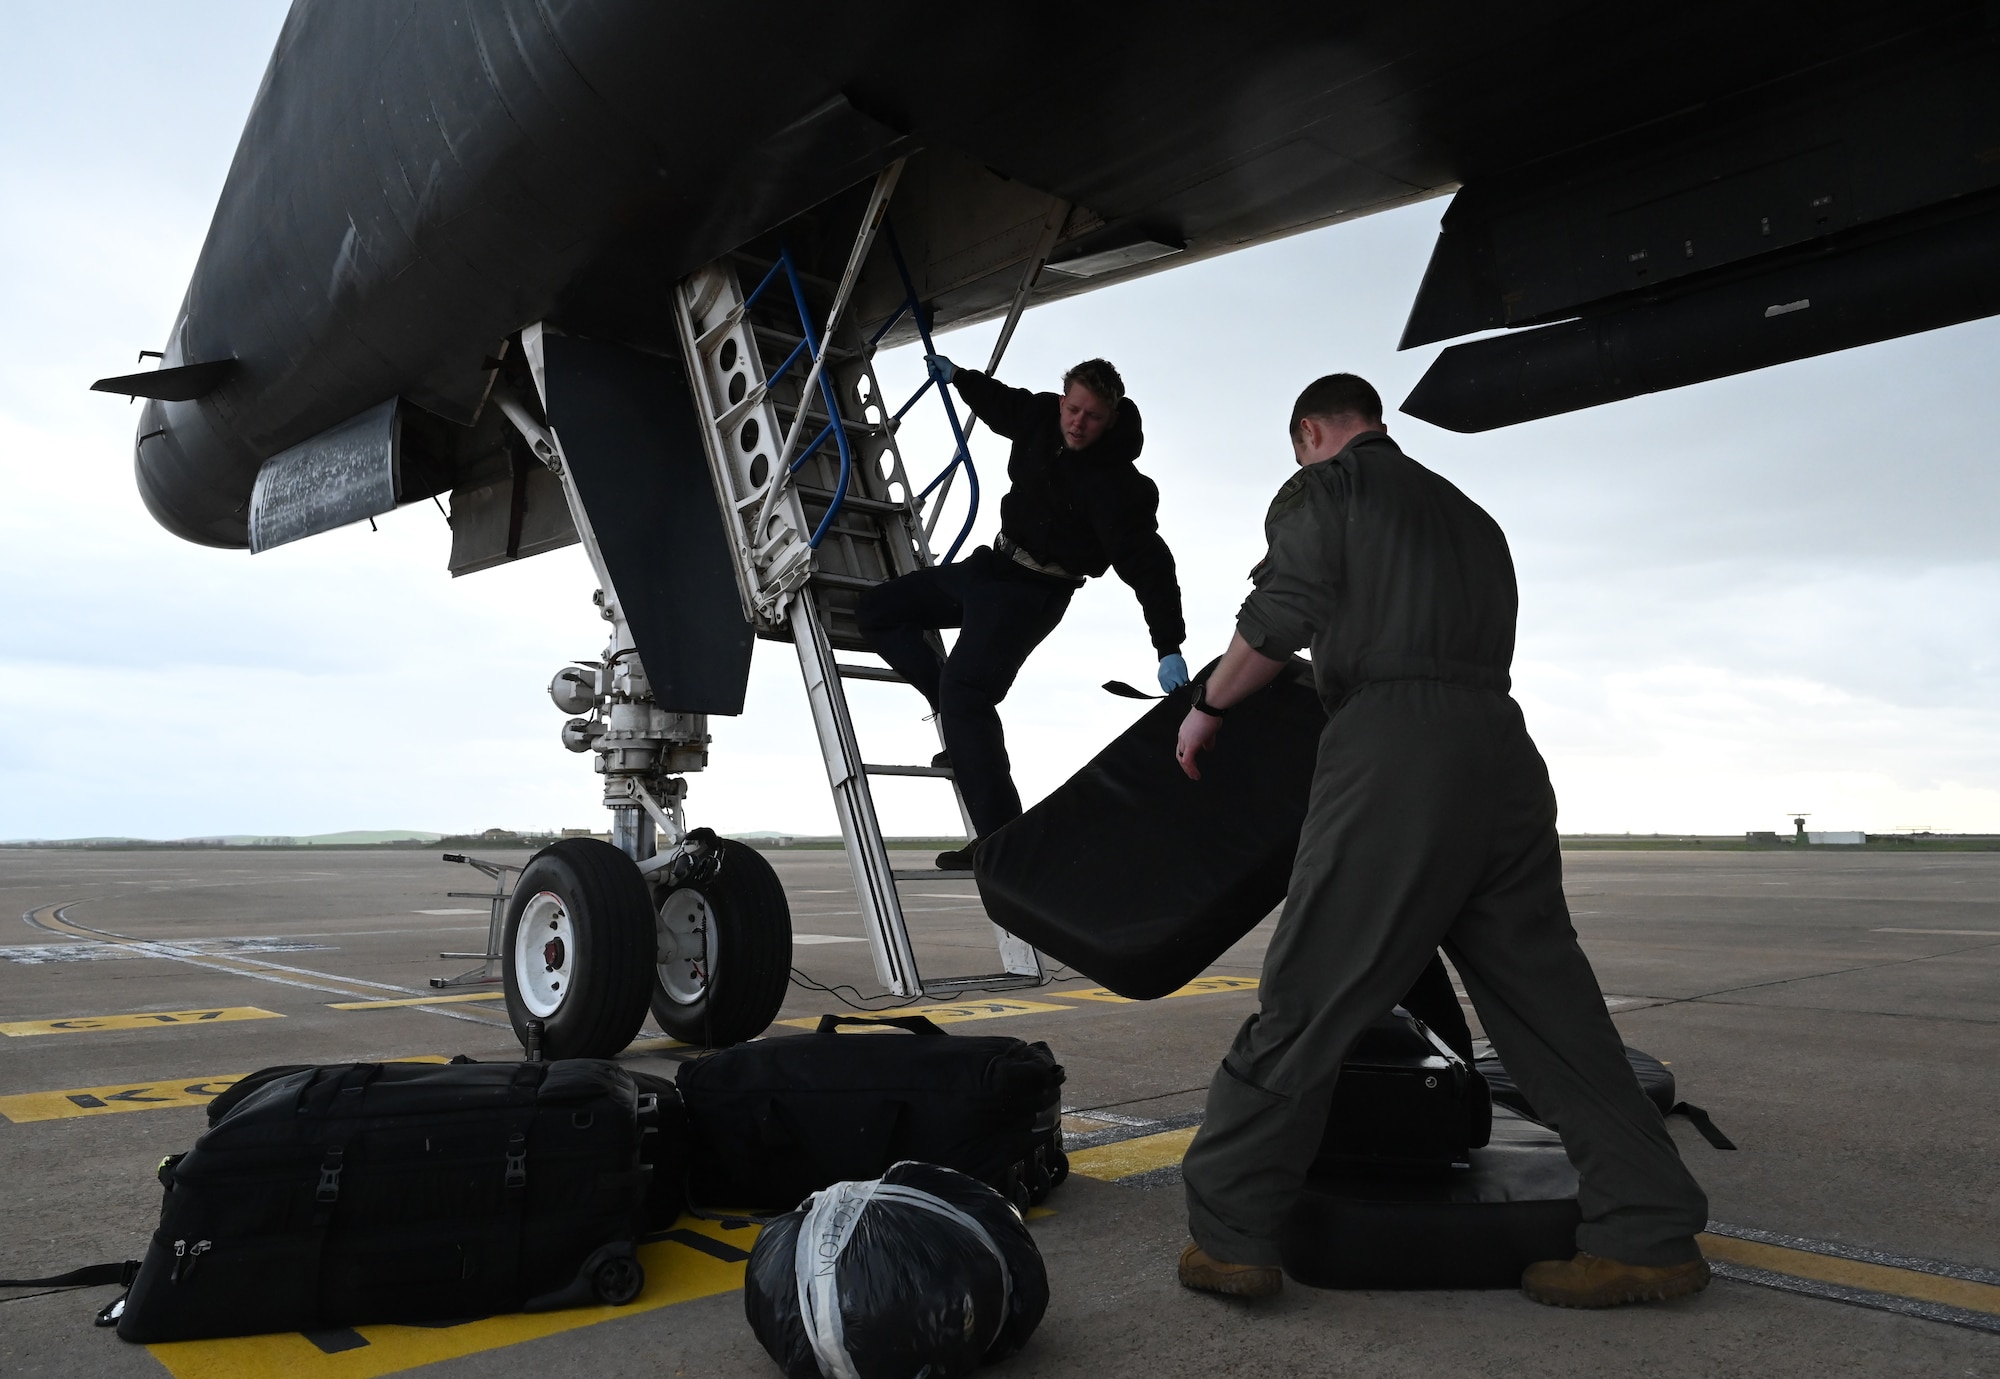 Members of the 9th Expeditionary Bomb Squadron unload cargo from a B-1B Lancer at Morón Air Base, Spain, during Bomber Task Force 24-2, March 26, 2024. The operational readiness of U.S. forces across all domains is critical to building partnerships, responding to crises, providing deterrence, and supporting Allies and partners. (U.S. Air Force photo by Staff Sgt. Holly Cook)